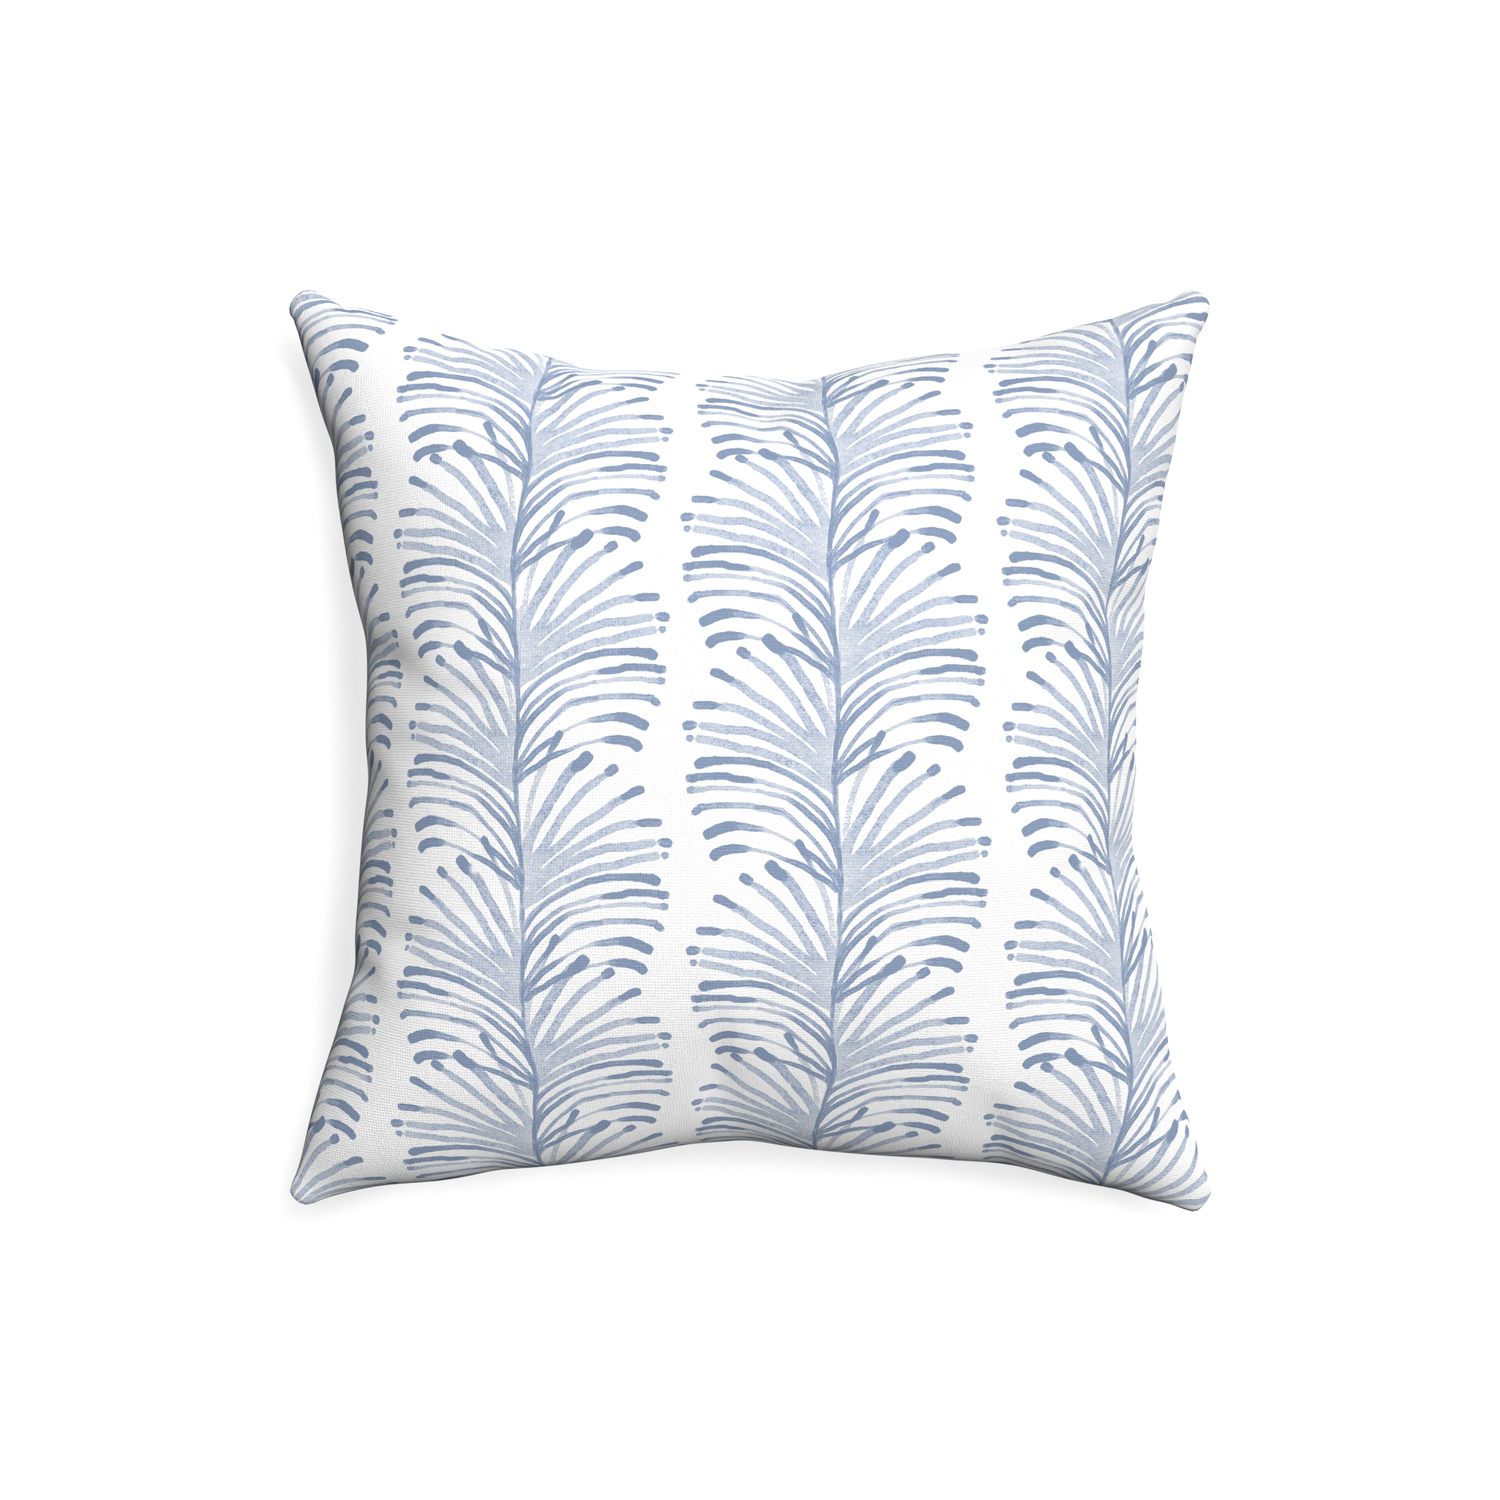 20-square emma sky custom sky blue botanical stripepillow with none on white background